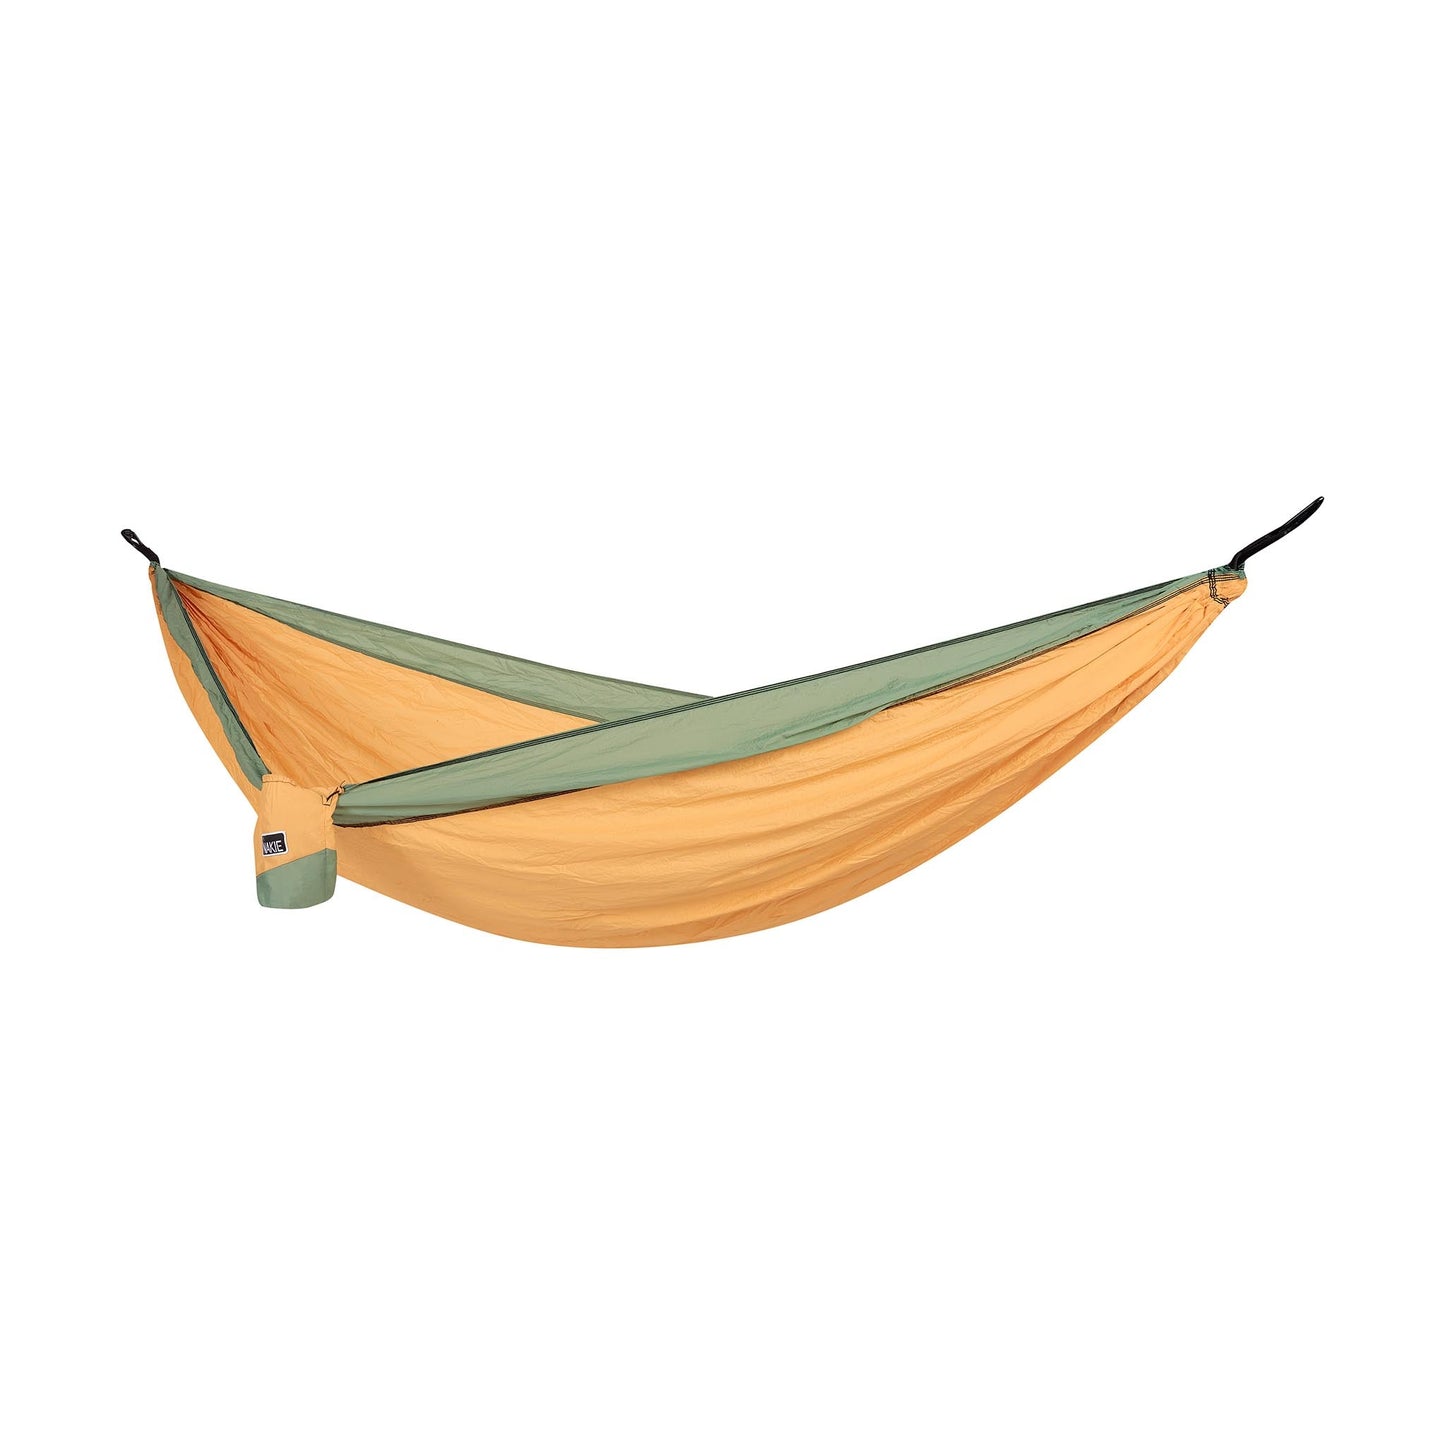 Golden Mango - Recycled Hammock With Straps